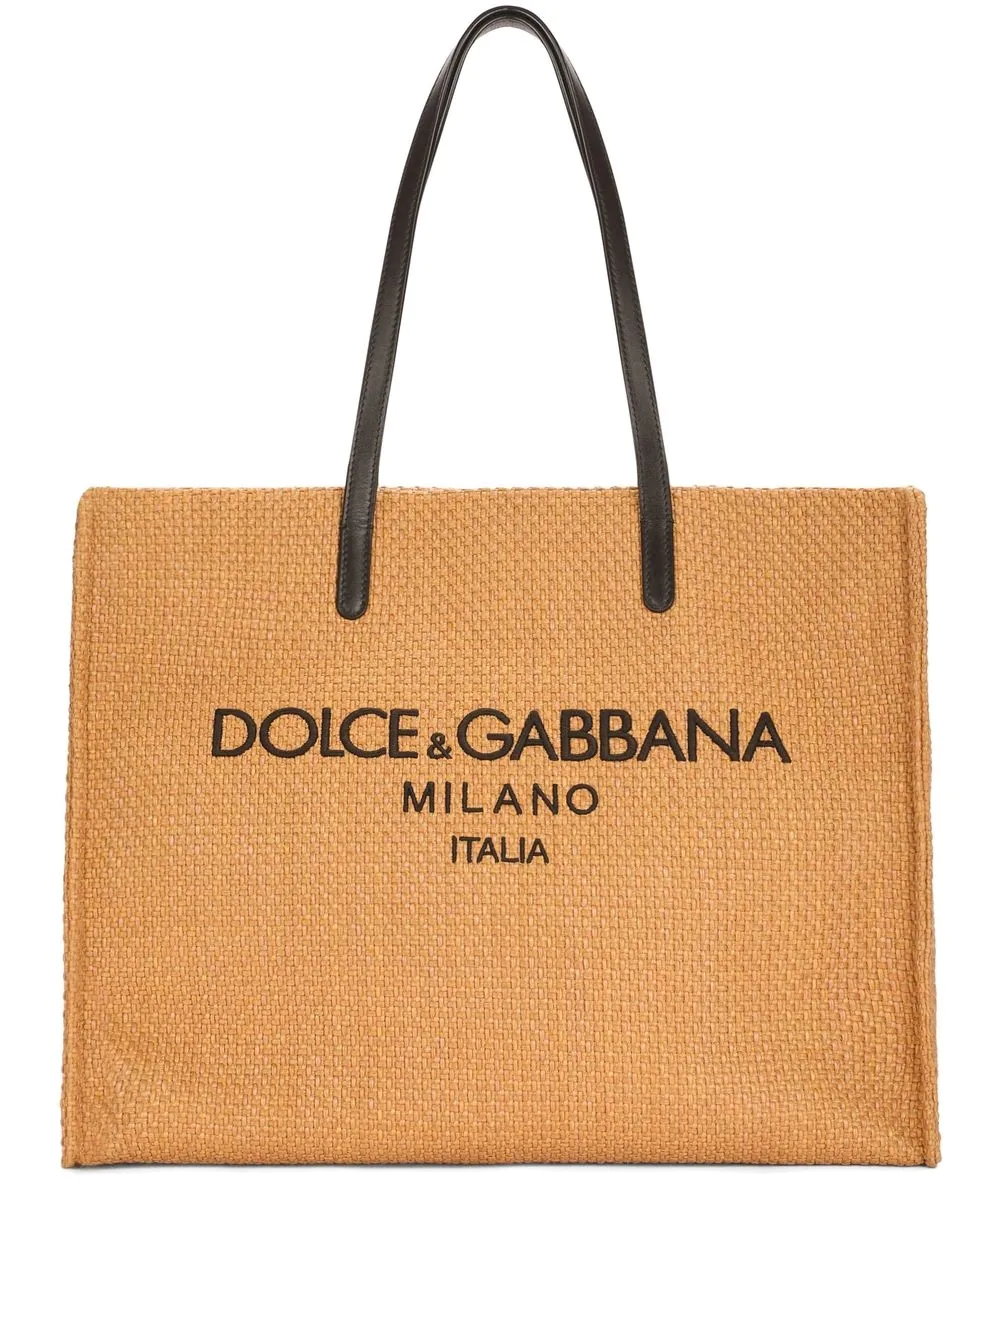 DOLCE & GABBANA TOTE BAG WITH EMBROIDERY